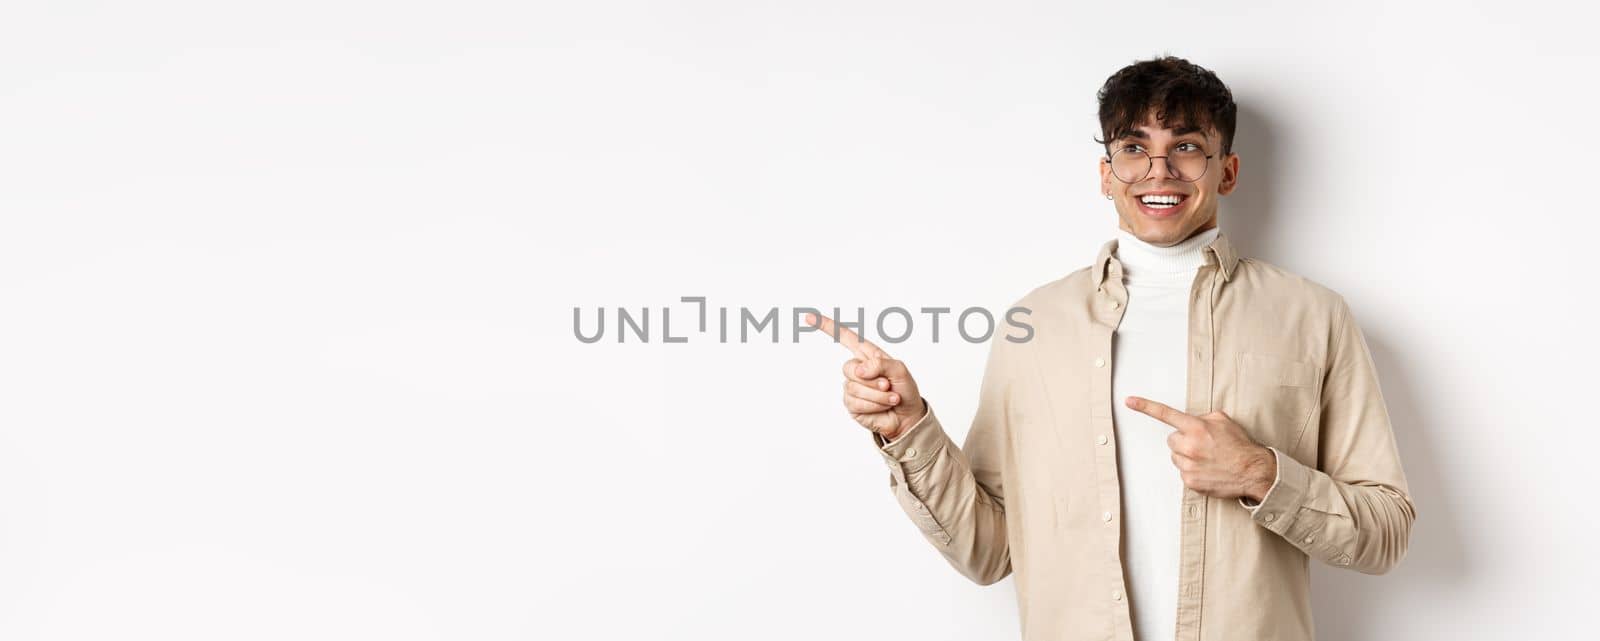 Excited and enthusiastic young man in glasses, pointing fingers and looking left with happy smile, standing in awe on white background.